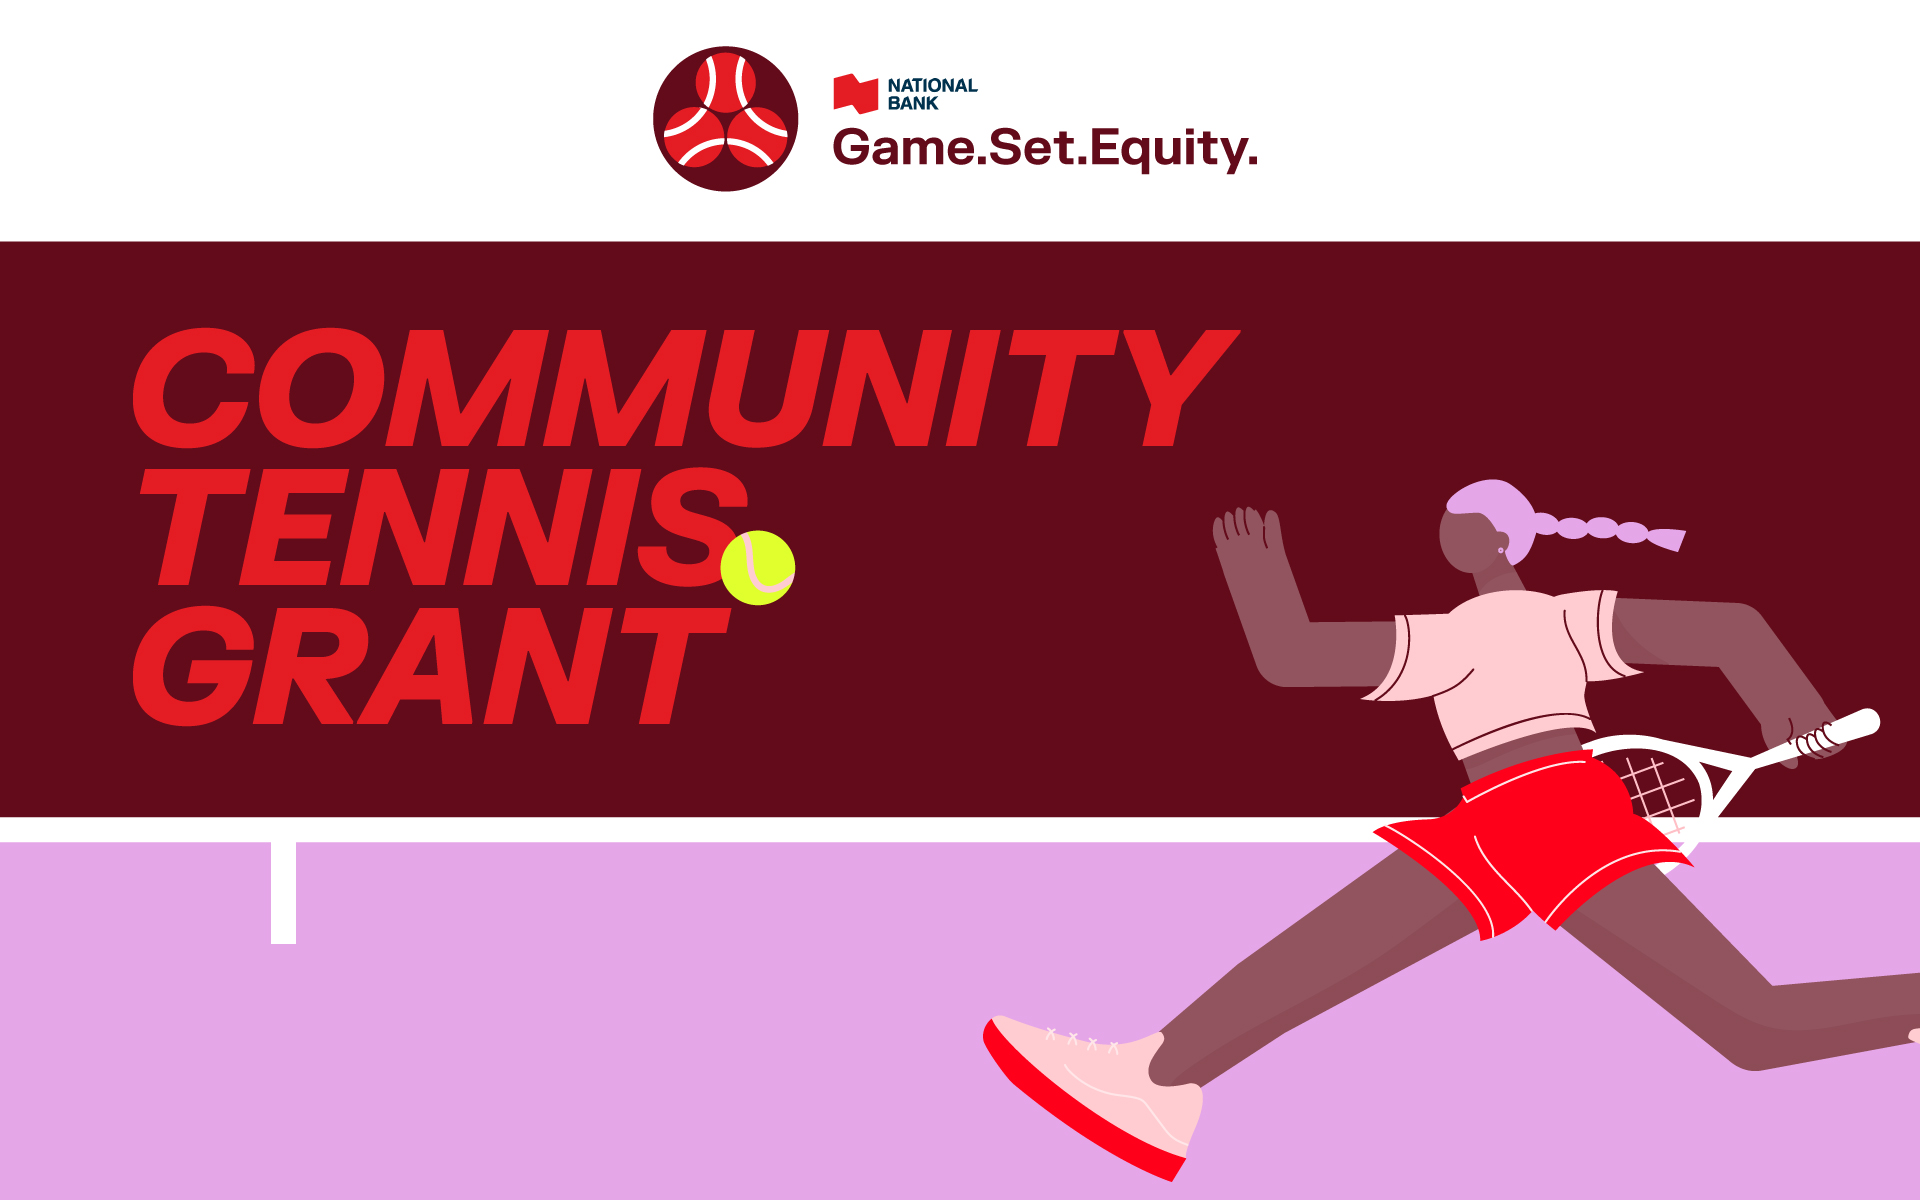 Tennis Canada and National Bank award eight grants as part of the